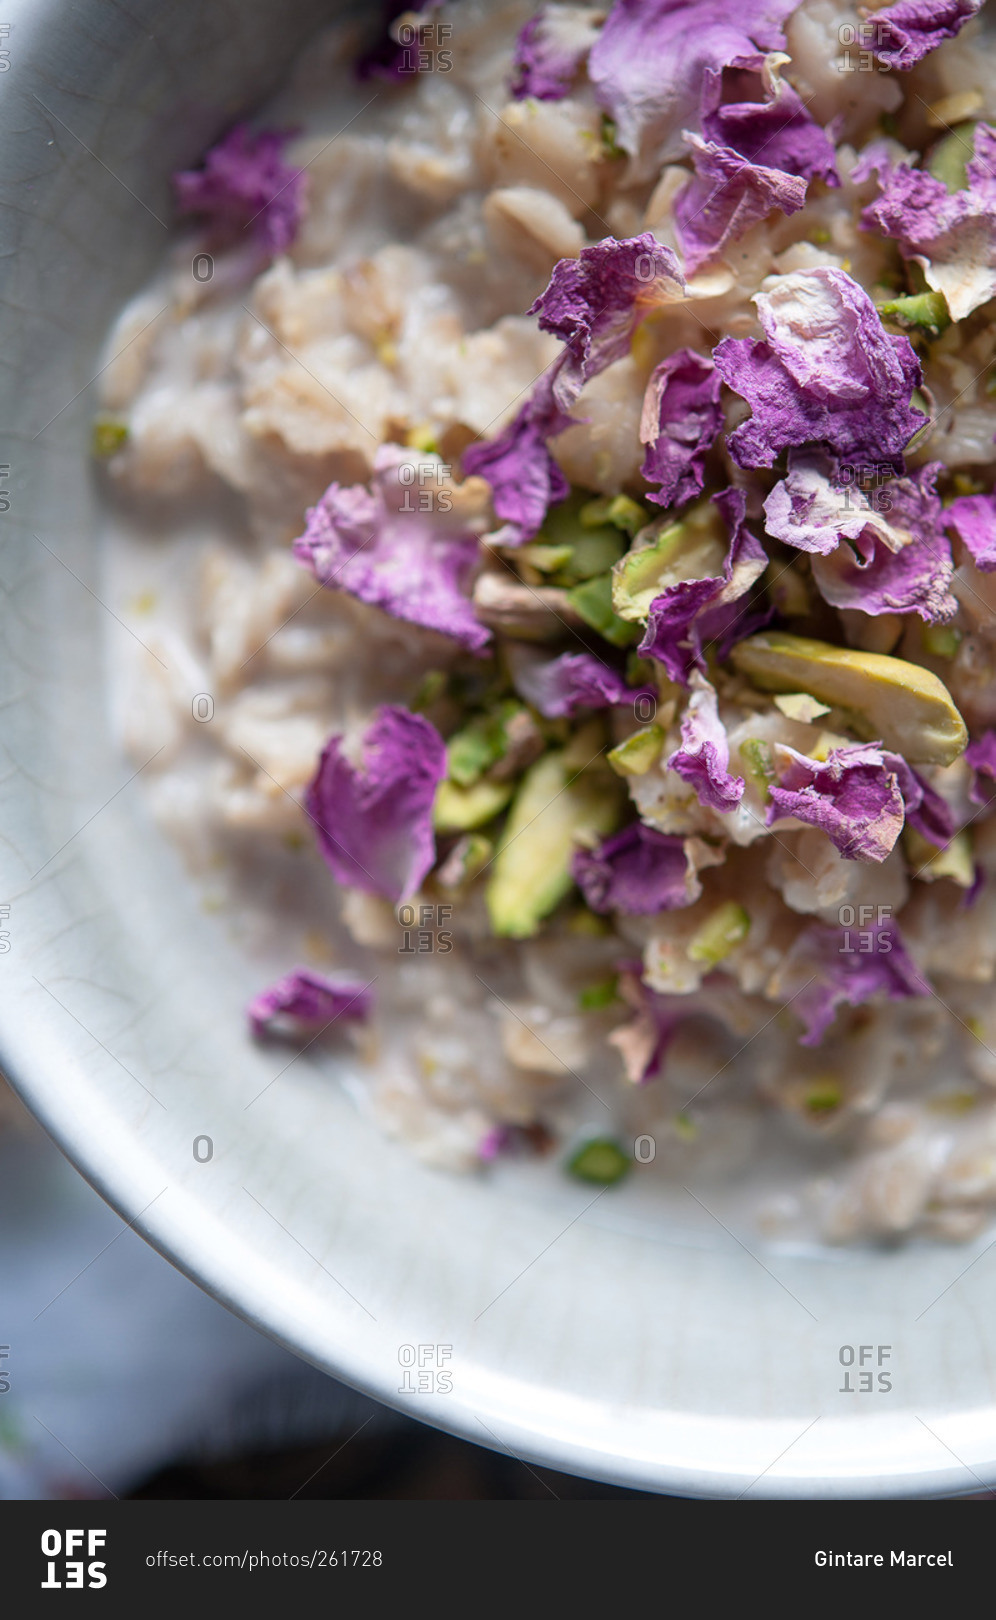 Bowl of oatmeal with purple flowers and pistachios